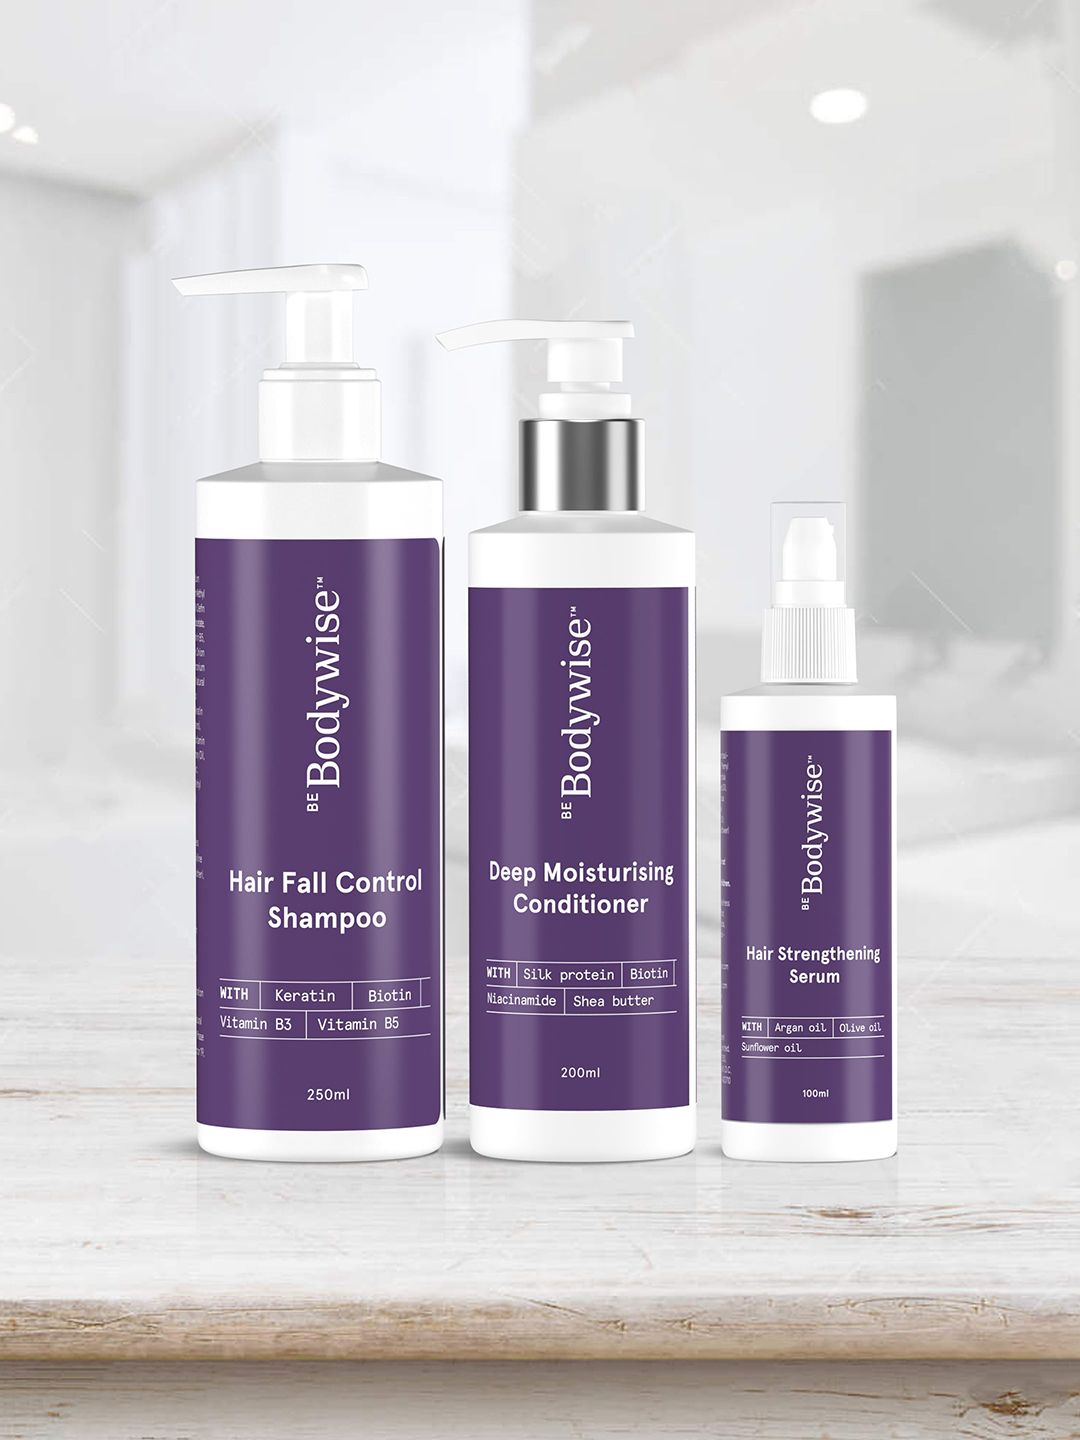 Be Bodywise Hair Care Necessities Kit - Keratin Shampoo, Conditioner, Hair Serum Price in India